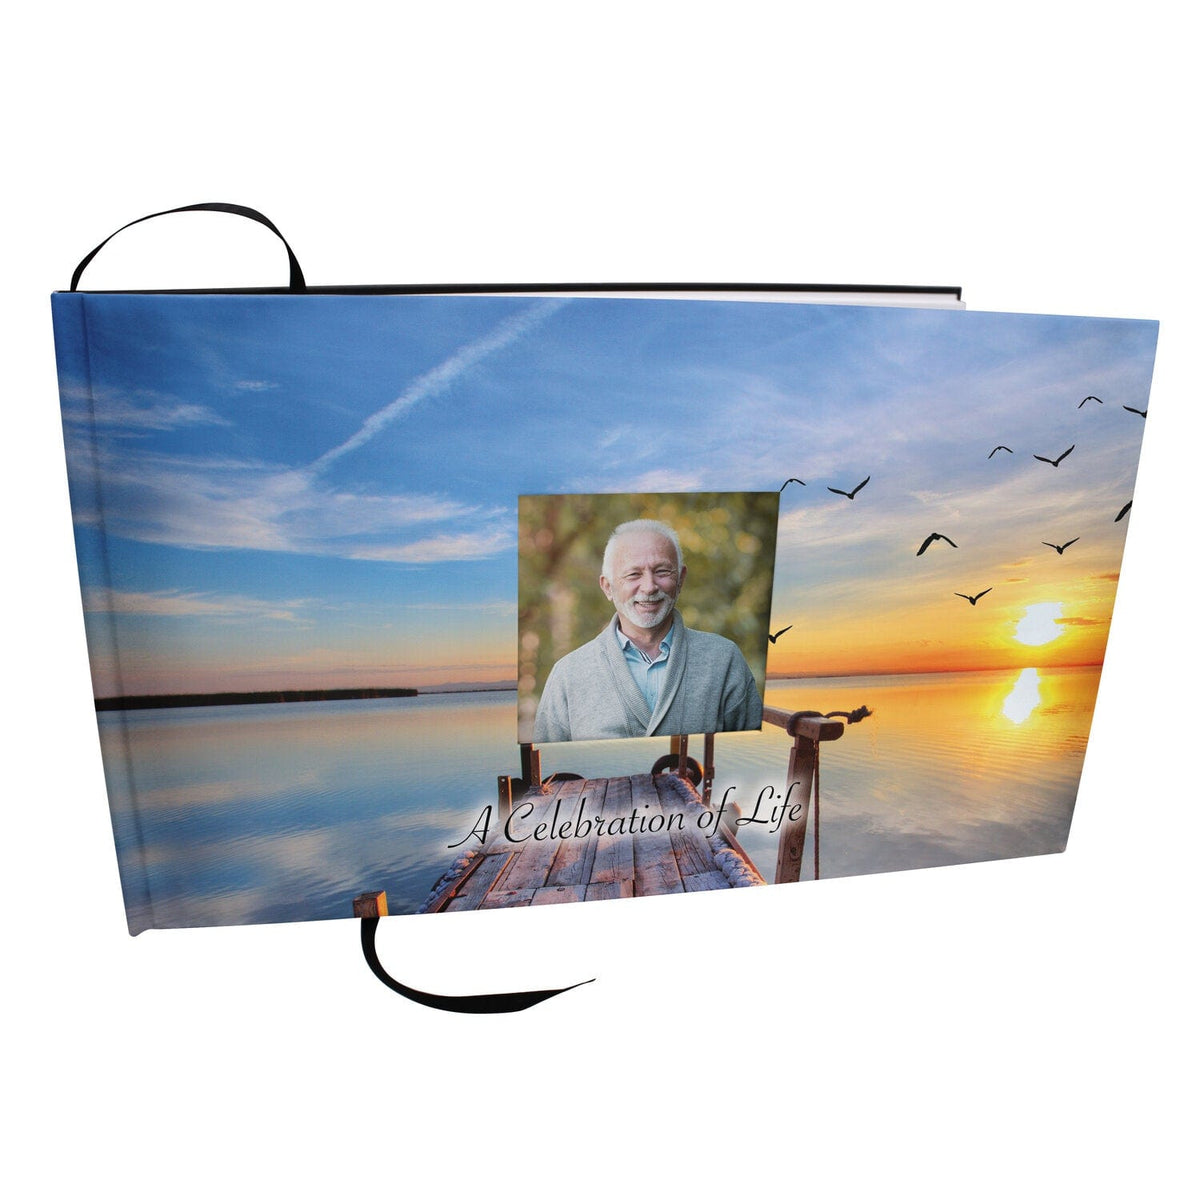 Commemorative Cremation Urns Dock of the Bay Sunset Matching Themed &#39;Celebration of Life&#39; Guest Book for Funeral or Memorial Service